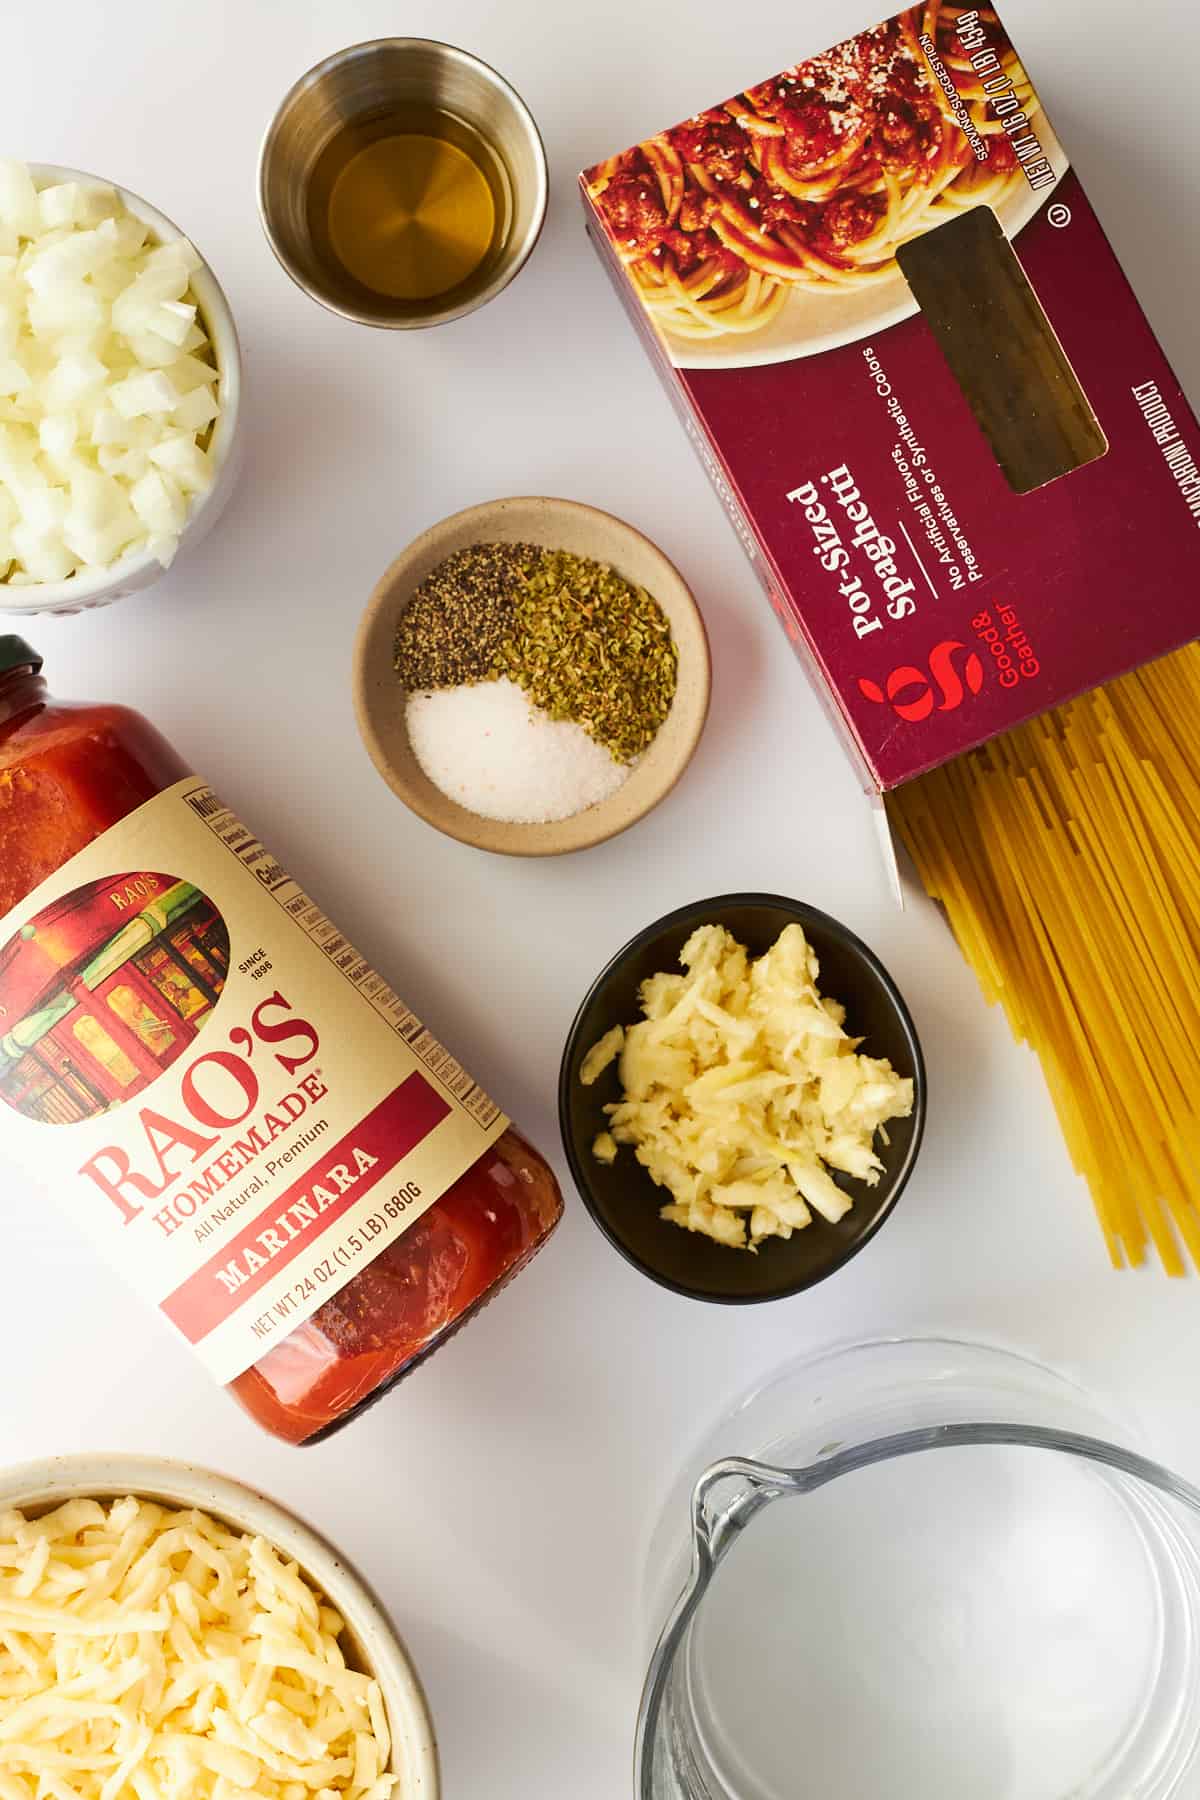 Ingredients to make oven baked spaghetti. 